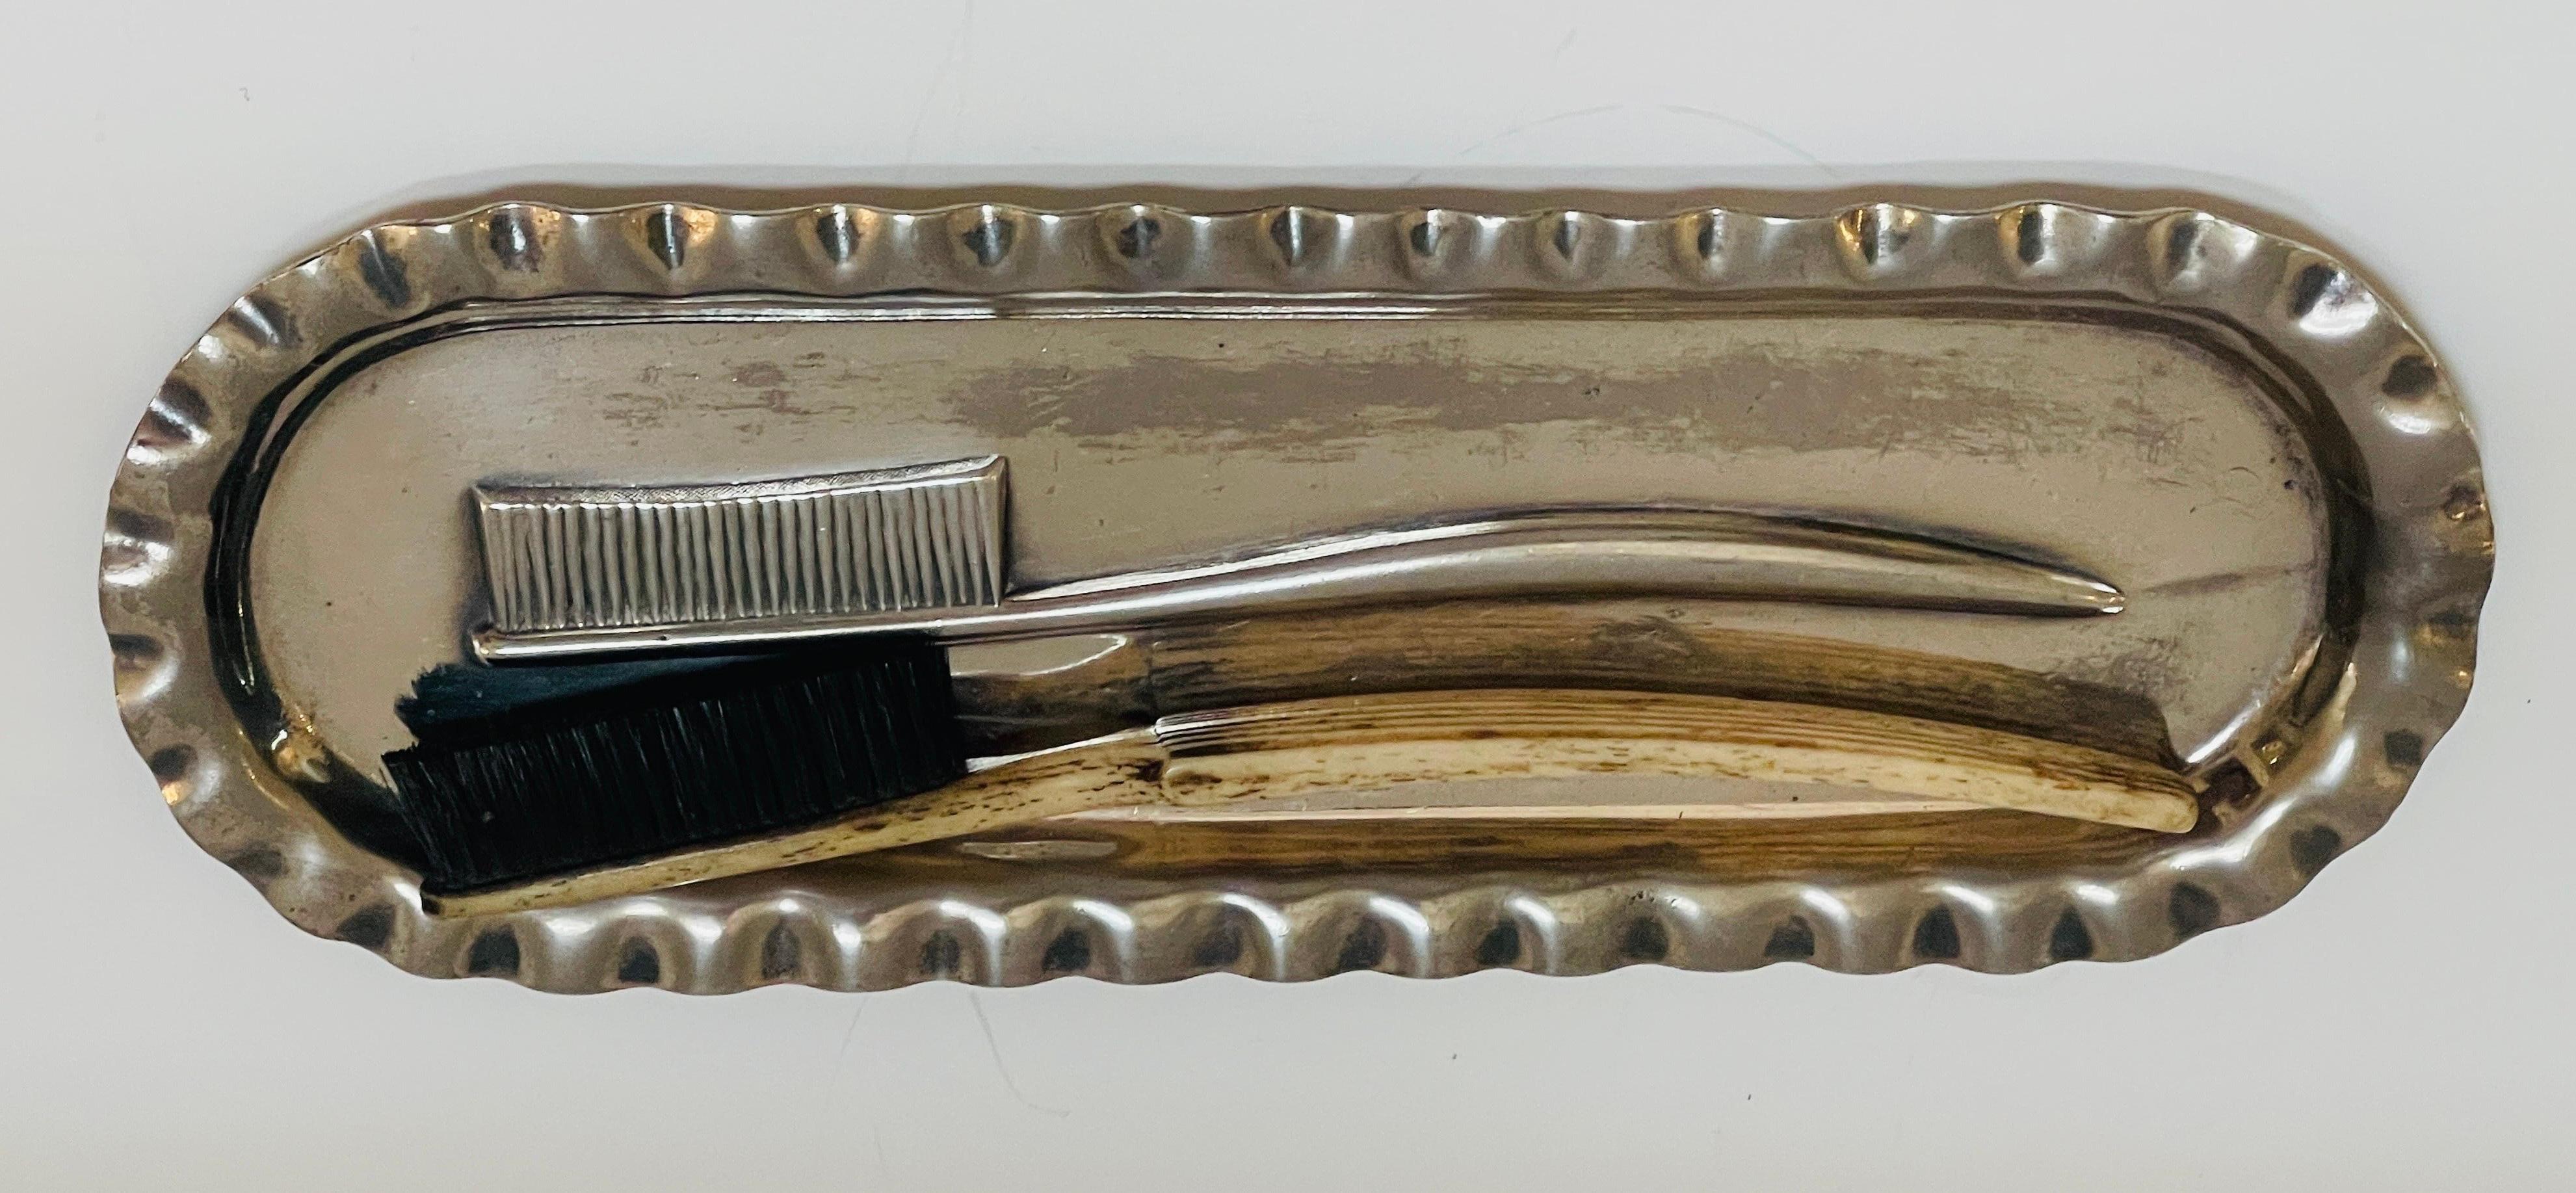 Victorian Silverplated Toothbrush Tray & Brush Set by James W. Tufts Co, Boston For Sale 5